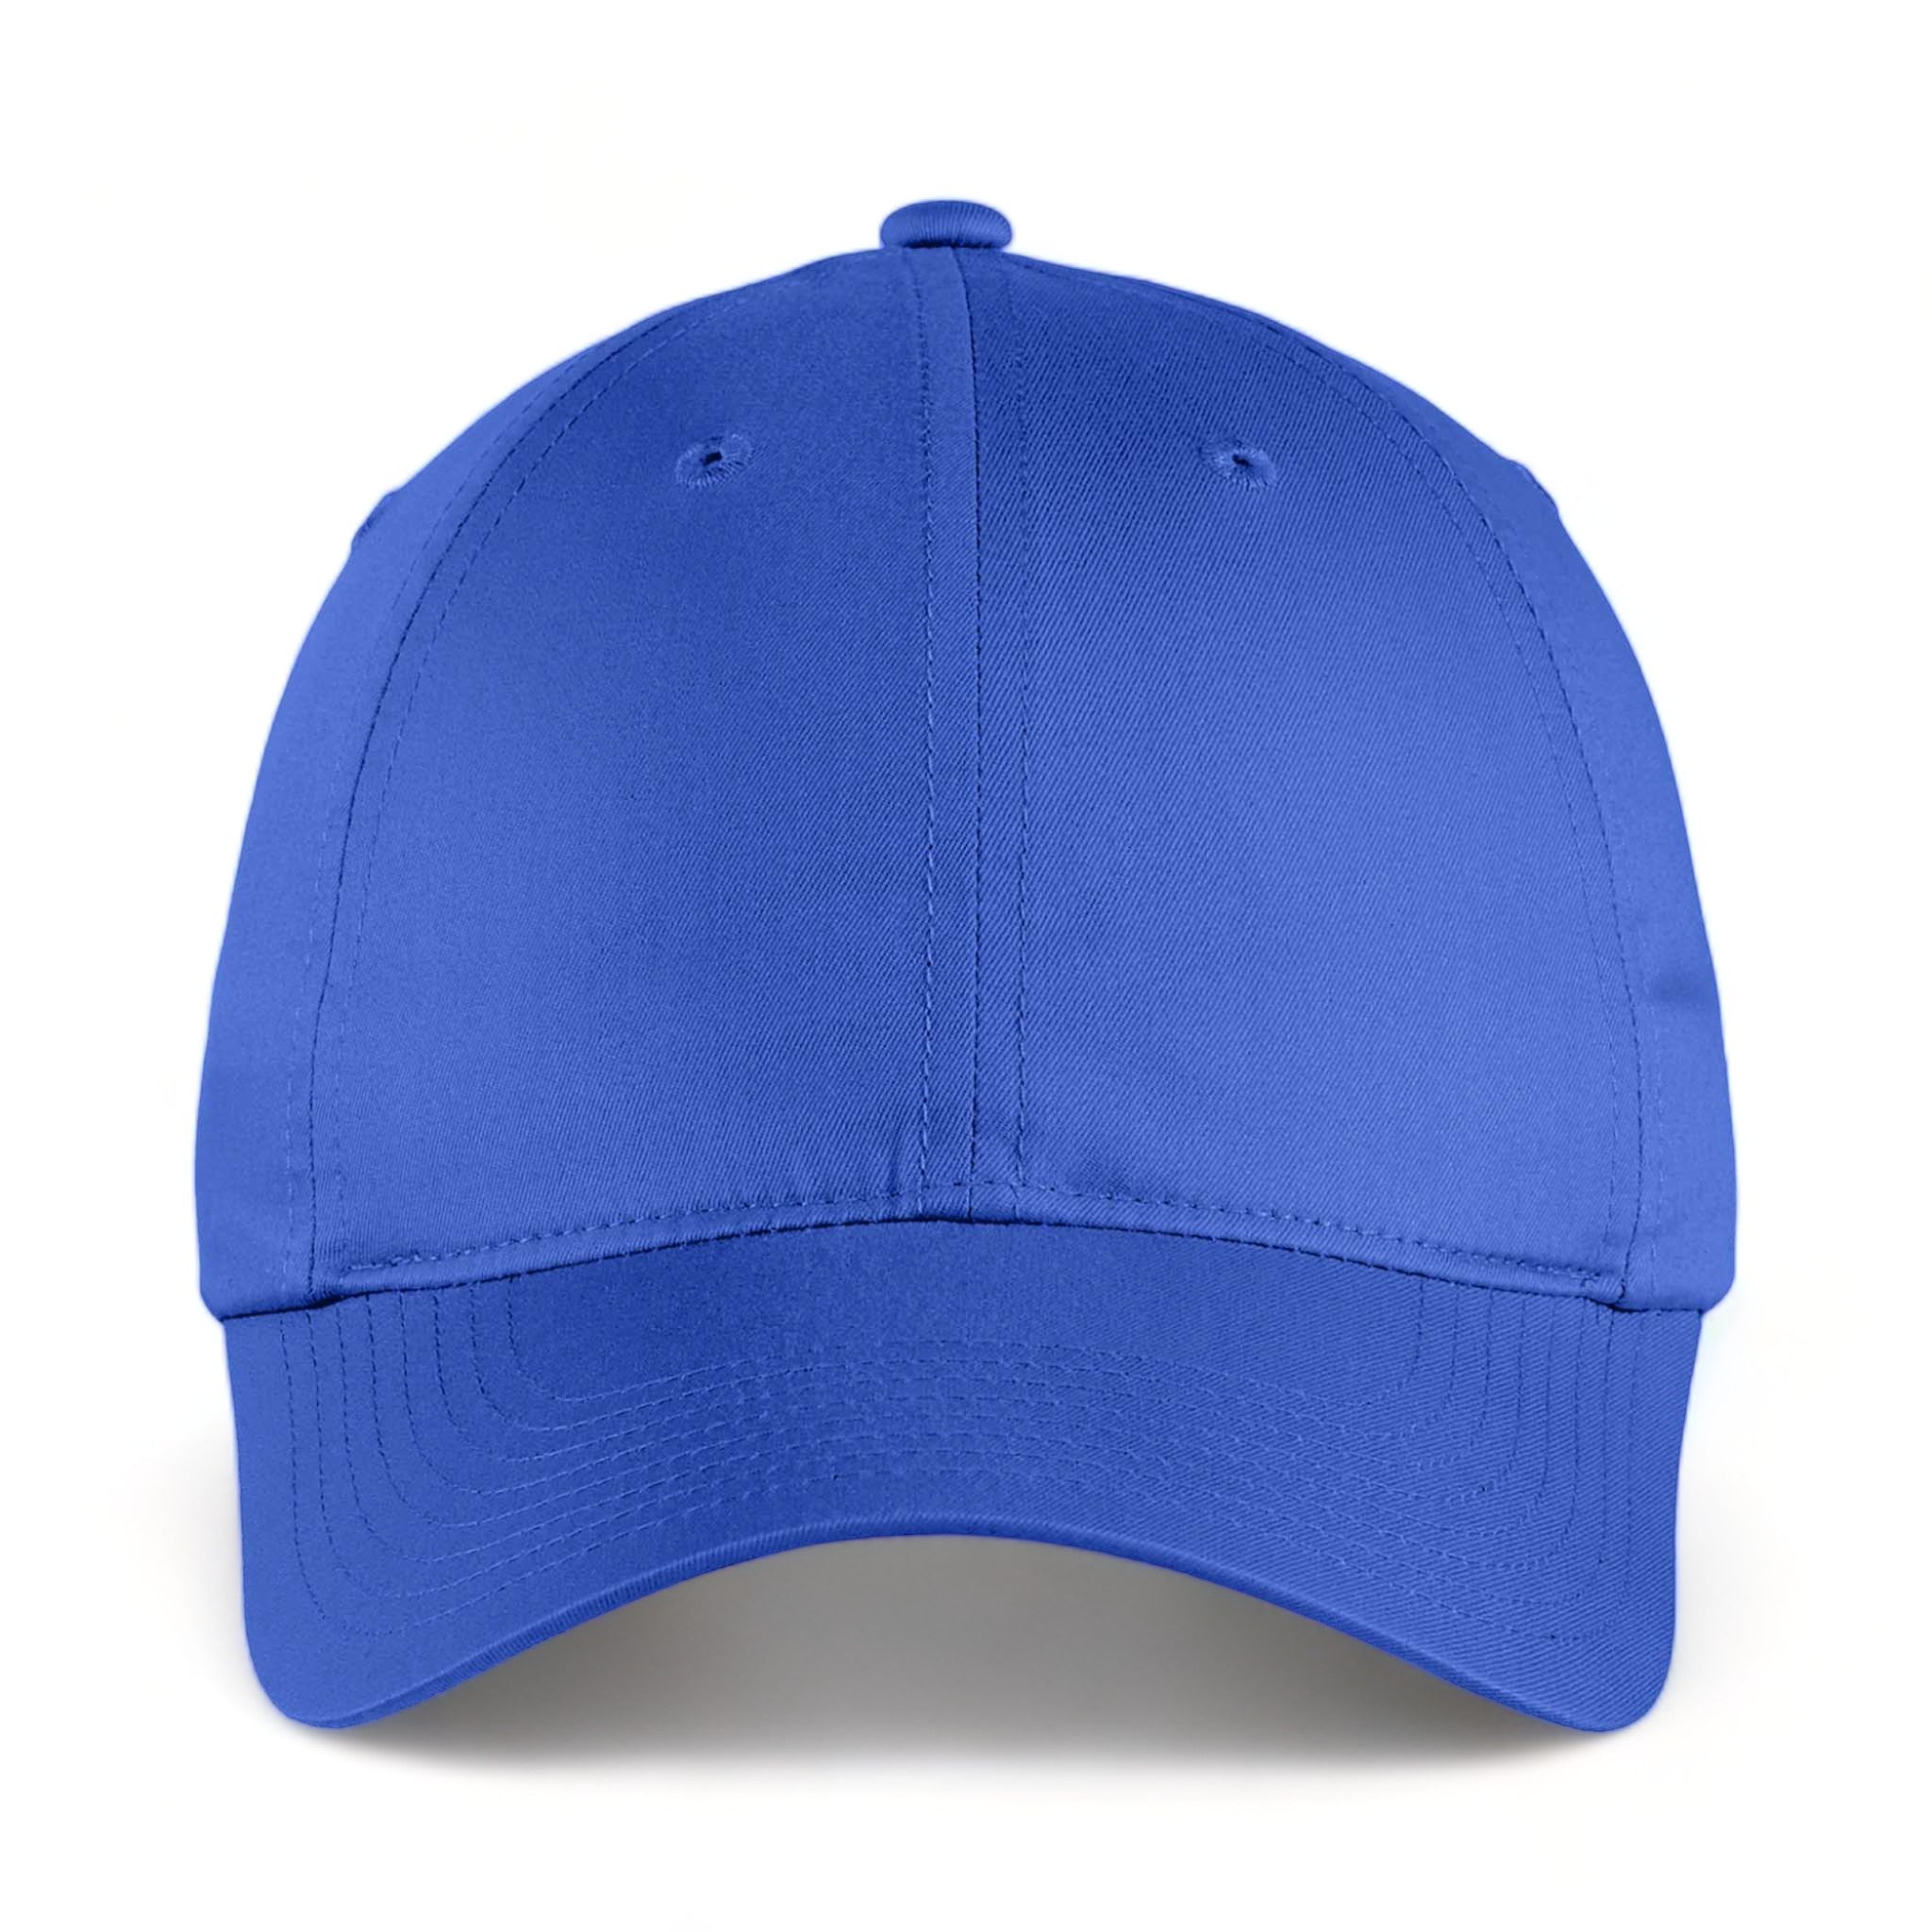 Front view of Nike NKFB6449 custom hat in game royal